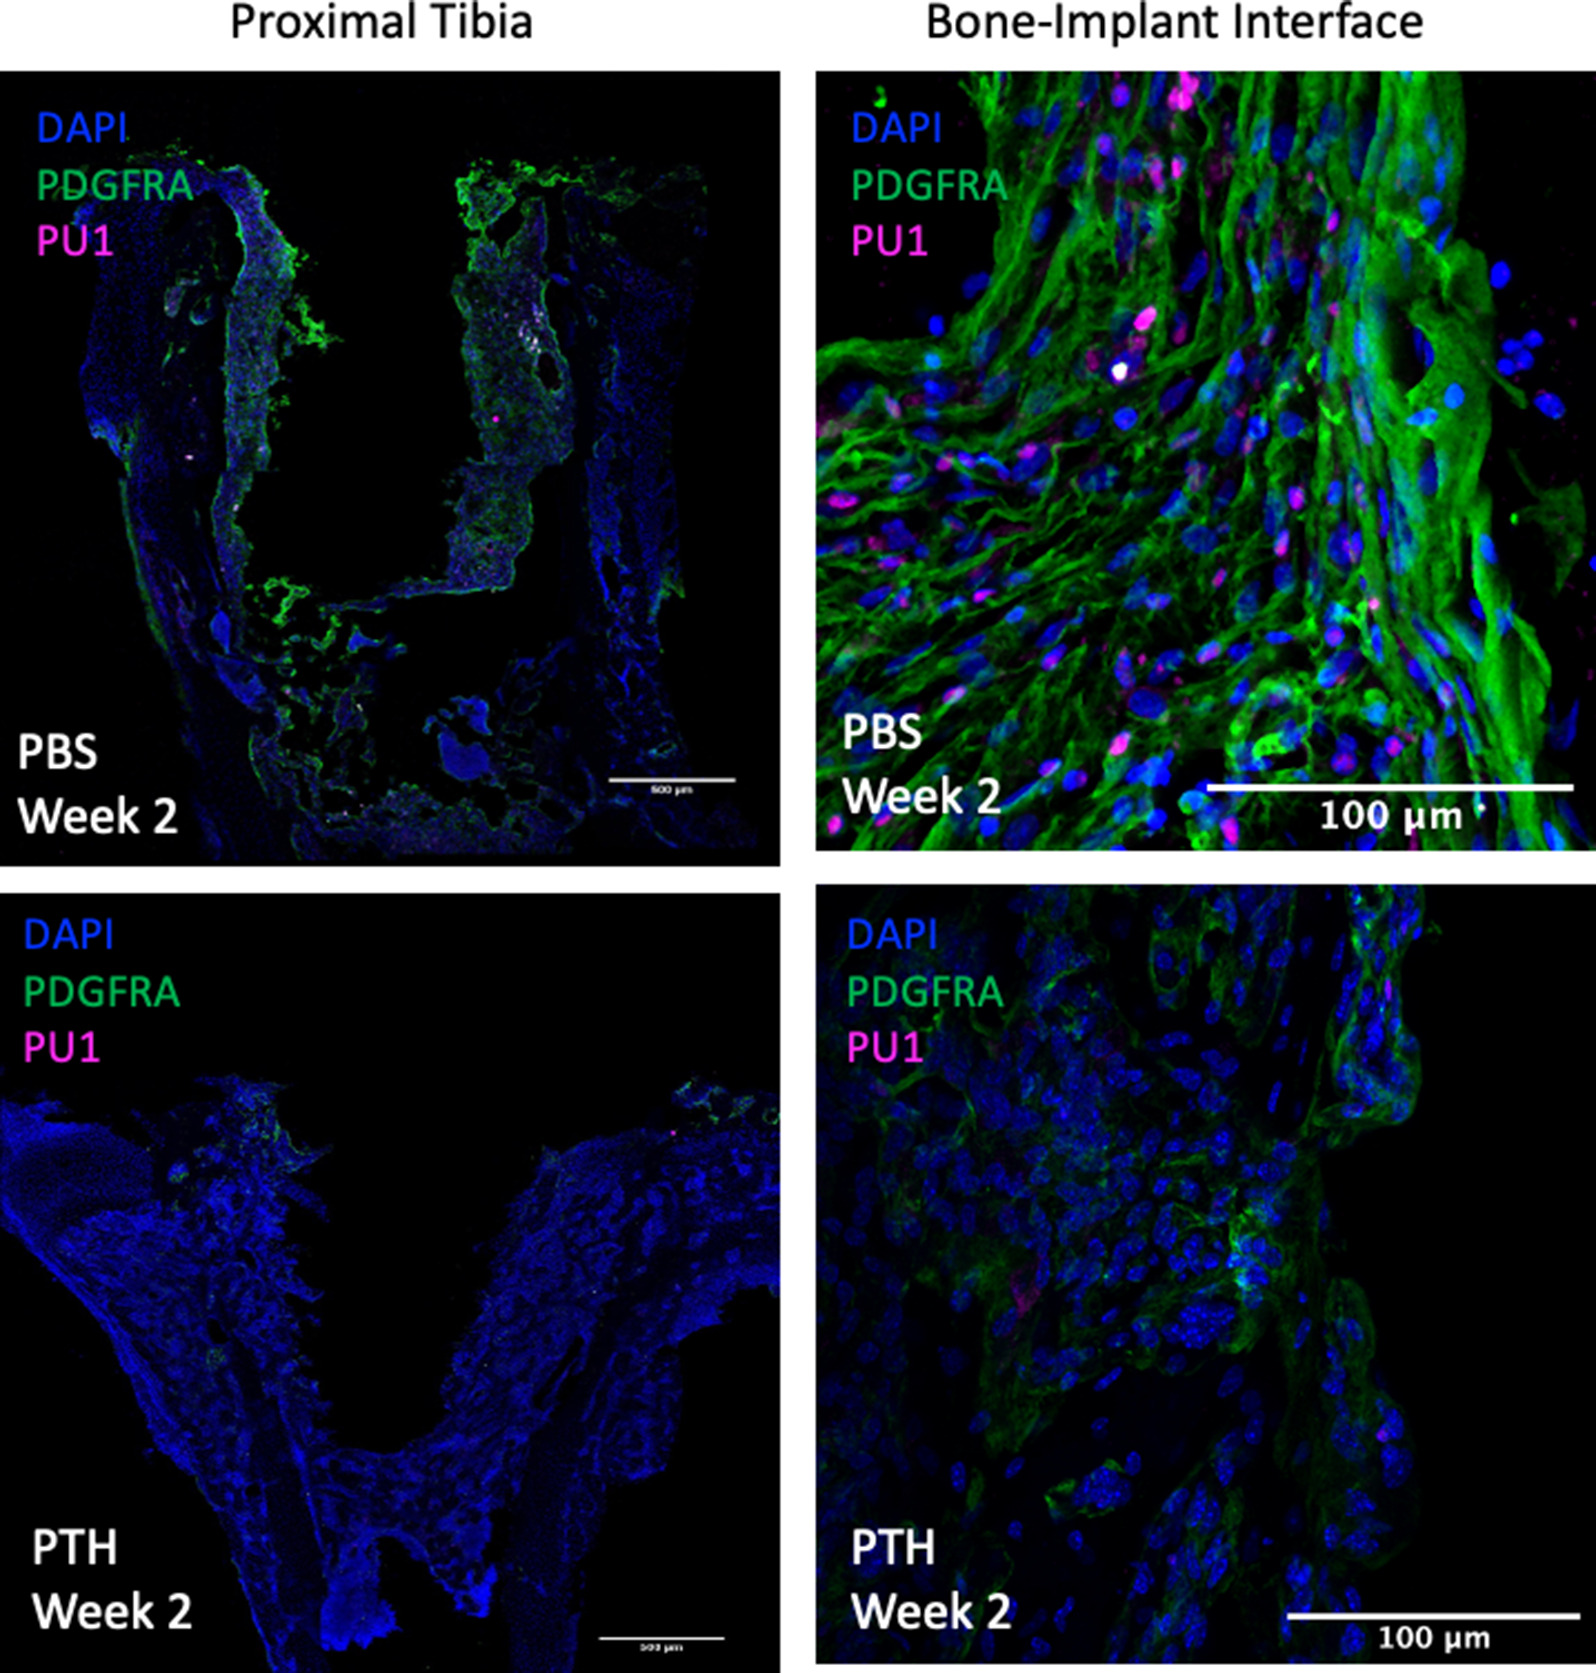 Fig. 5 
          Membrane formation visualized through immunofluorescence staining with platelet-derived growth factor receptor α (PDGFRa) and PU.1 labelling. The intermittent parathyroid hormone (iPTH)-treated group displays a distinct decrease in PDGFRa and PU.1 signal, indicating a reduction of fibrous tissue formation around the implant. Scale bars: 500 µm (left panel) and 100 µm (right panel). DAPI, 4,6-diamidino-2-phenylindole.
        